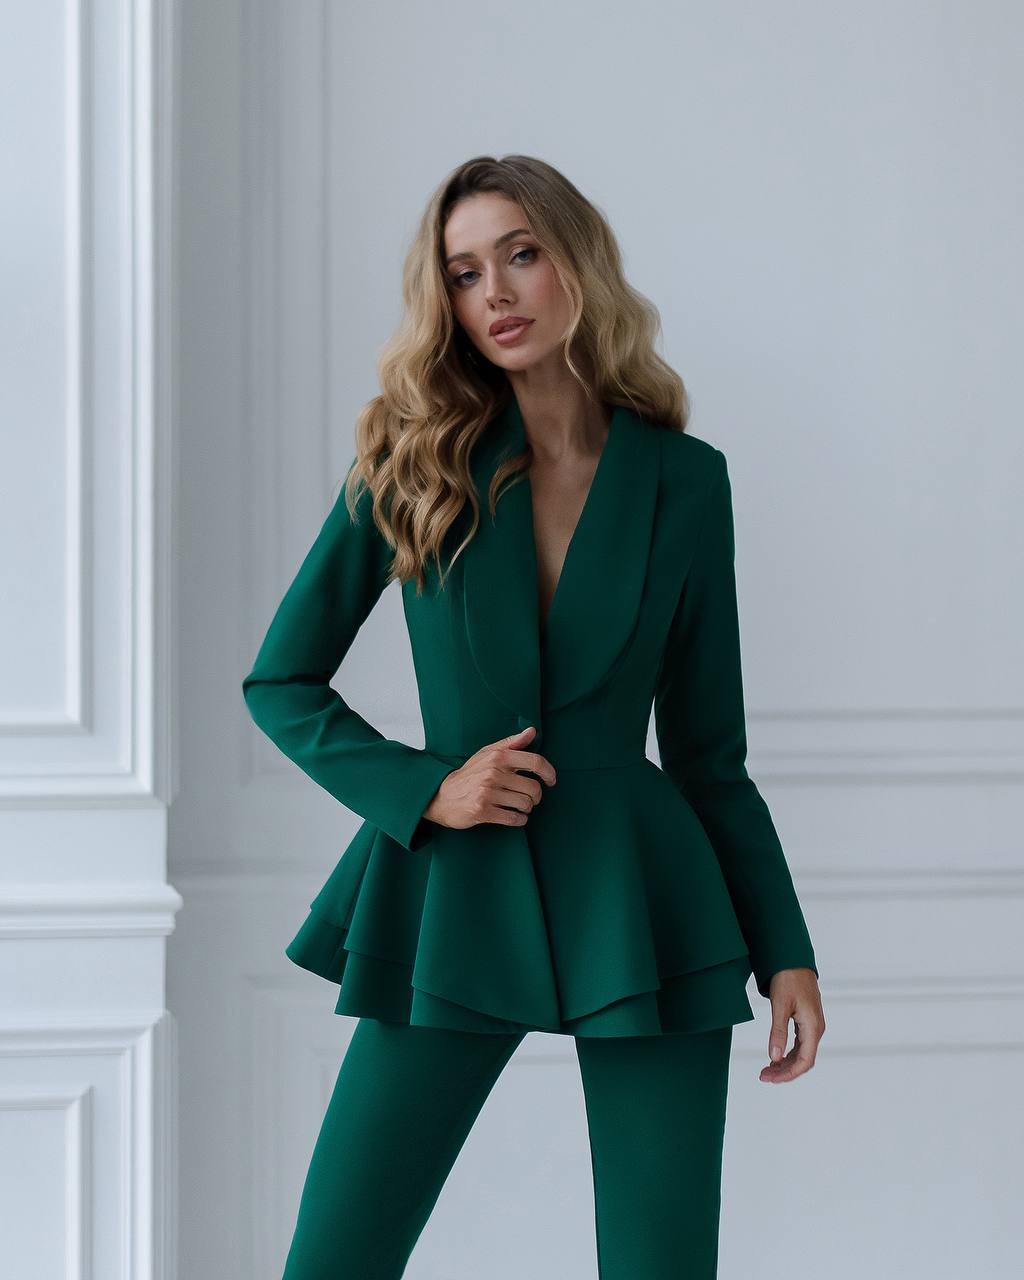 a woman in a green suit posing for the camera